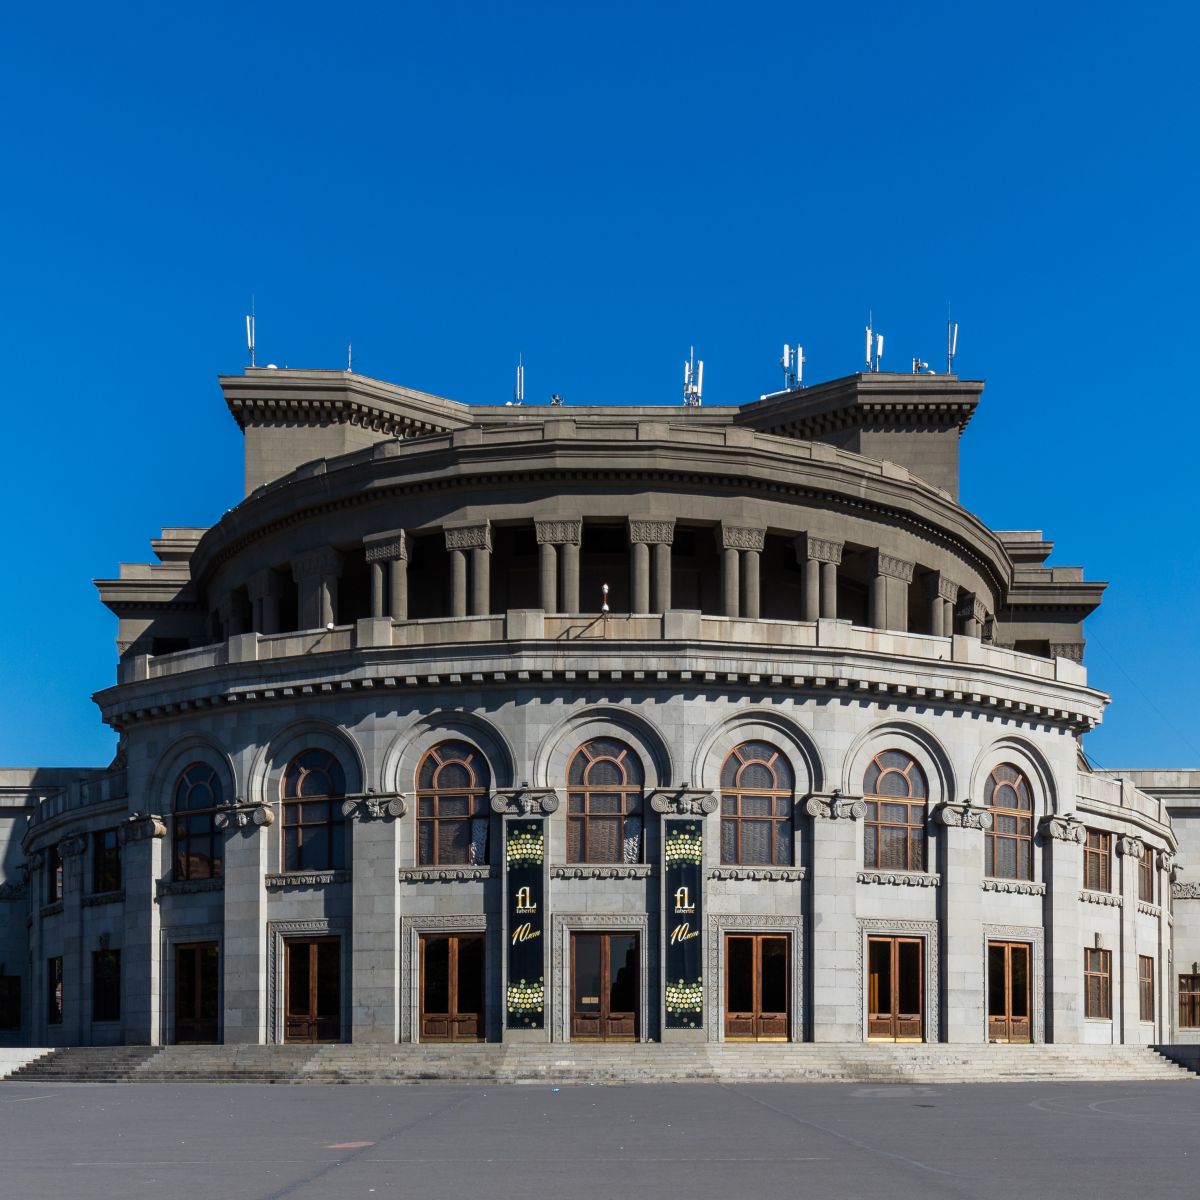 the National Academic Theatre of Opera and Ballet, which Tamanian designed, stands out as an absolute masterpiece.